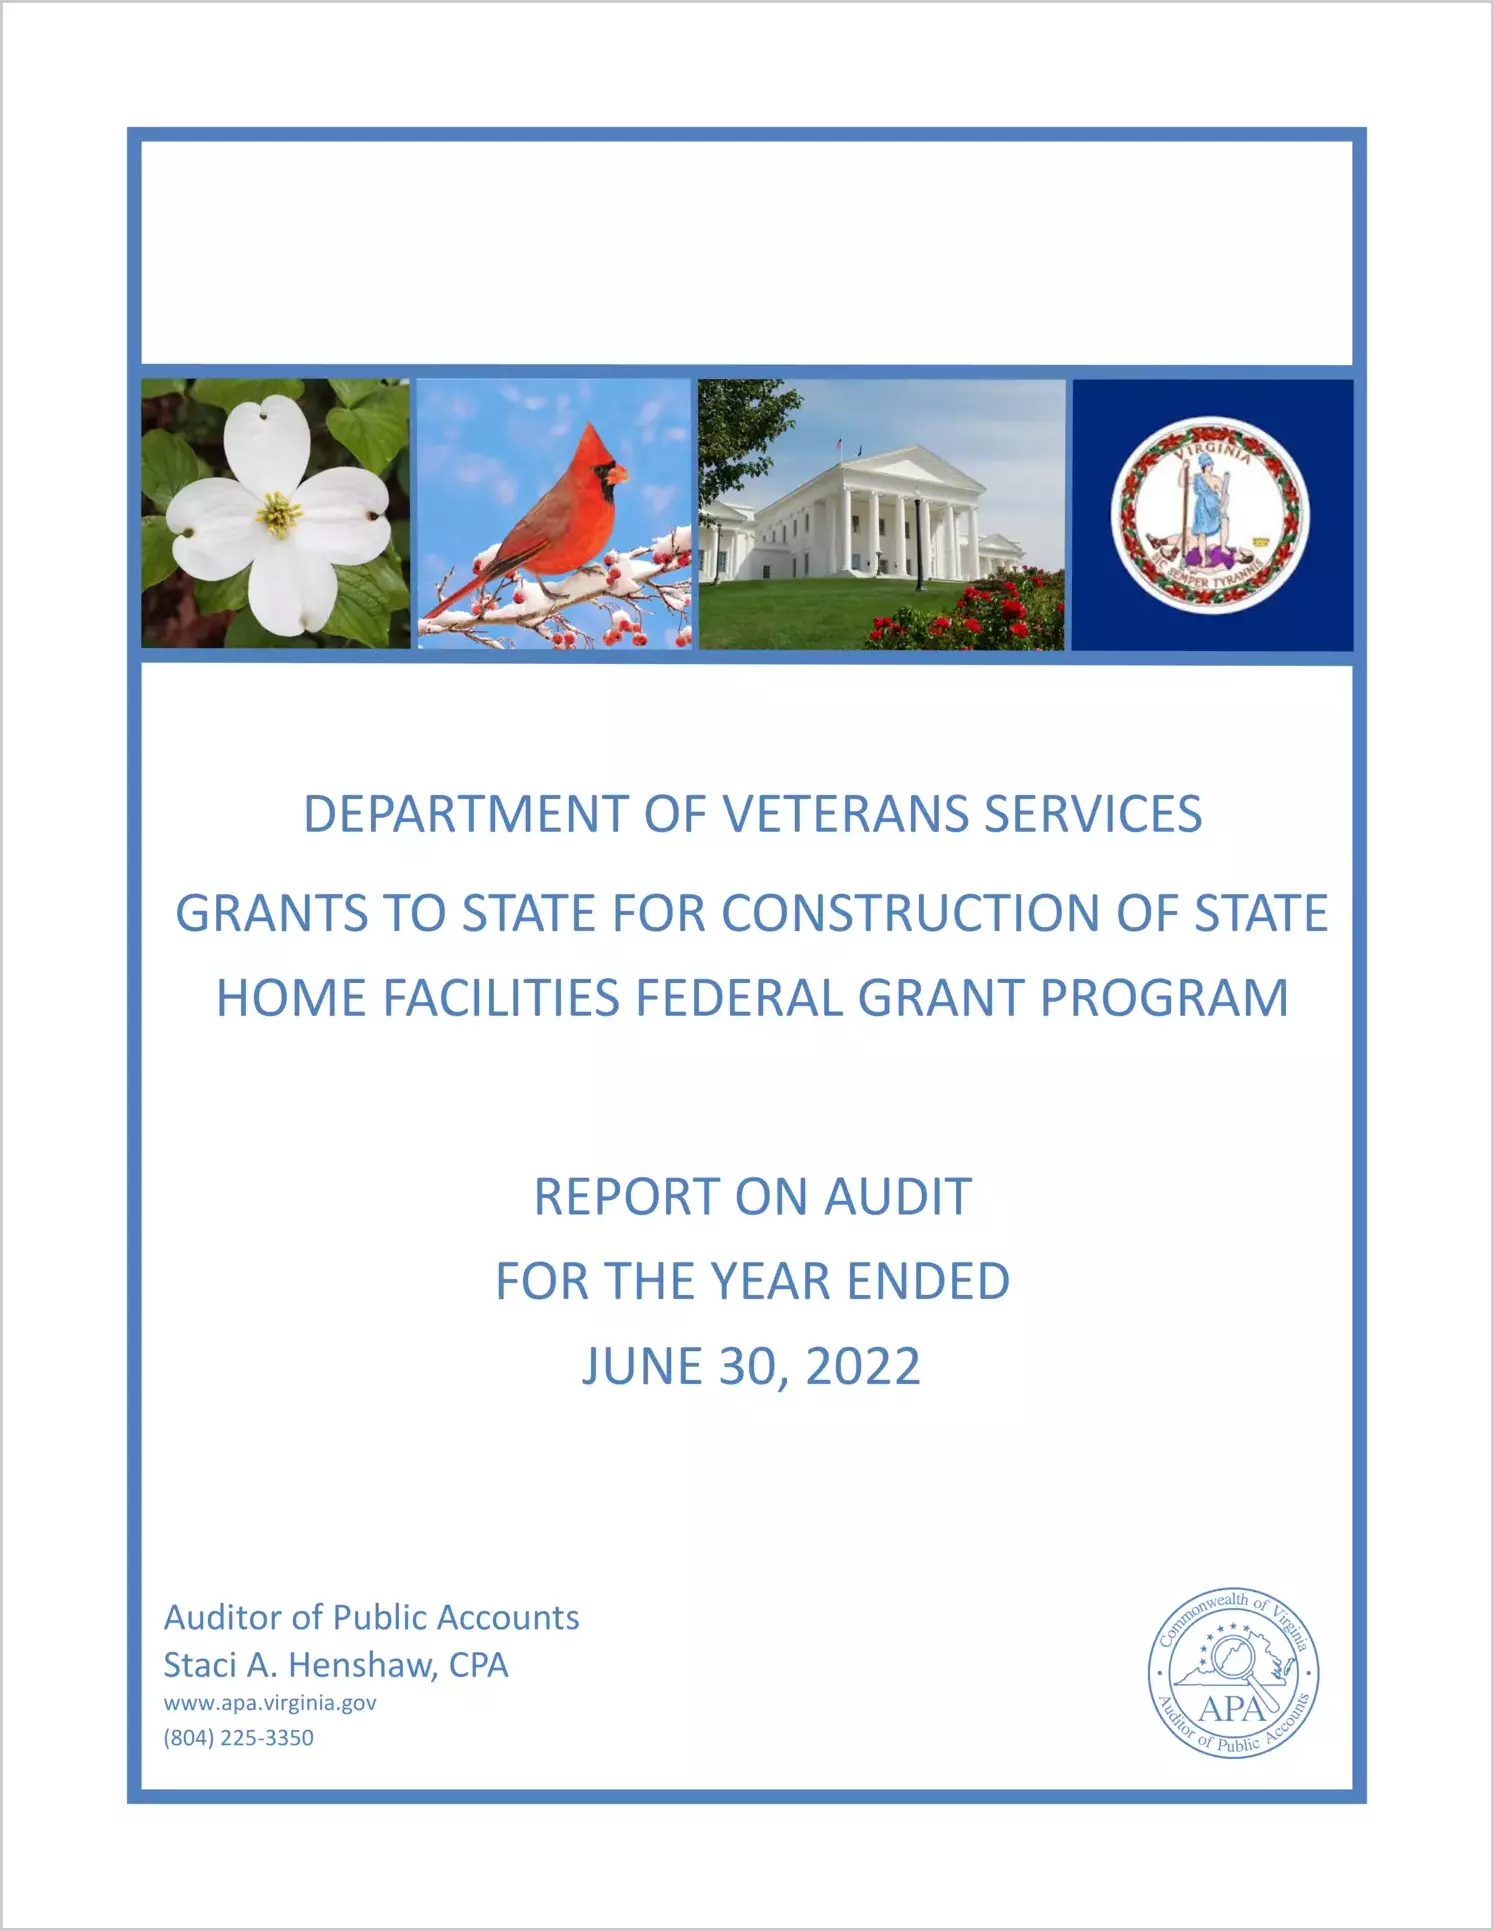 Department of Veterans Services Grants to State for Construction of State Home Facilities Federal Grant Program for the year ended June 30, 2022